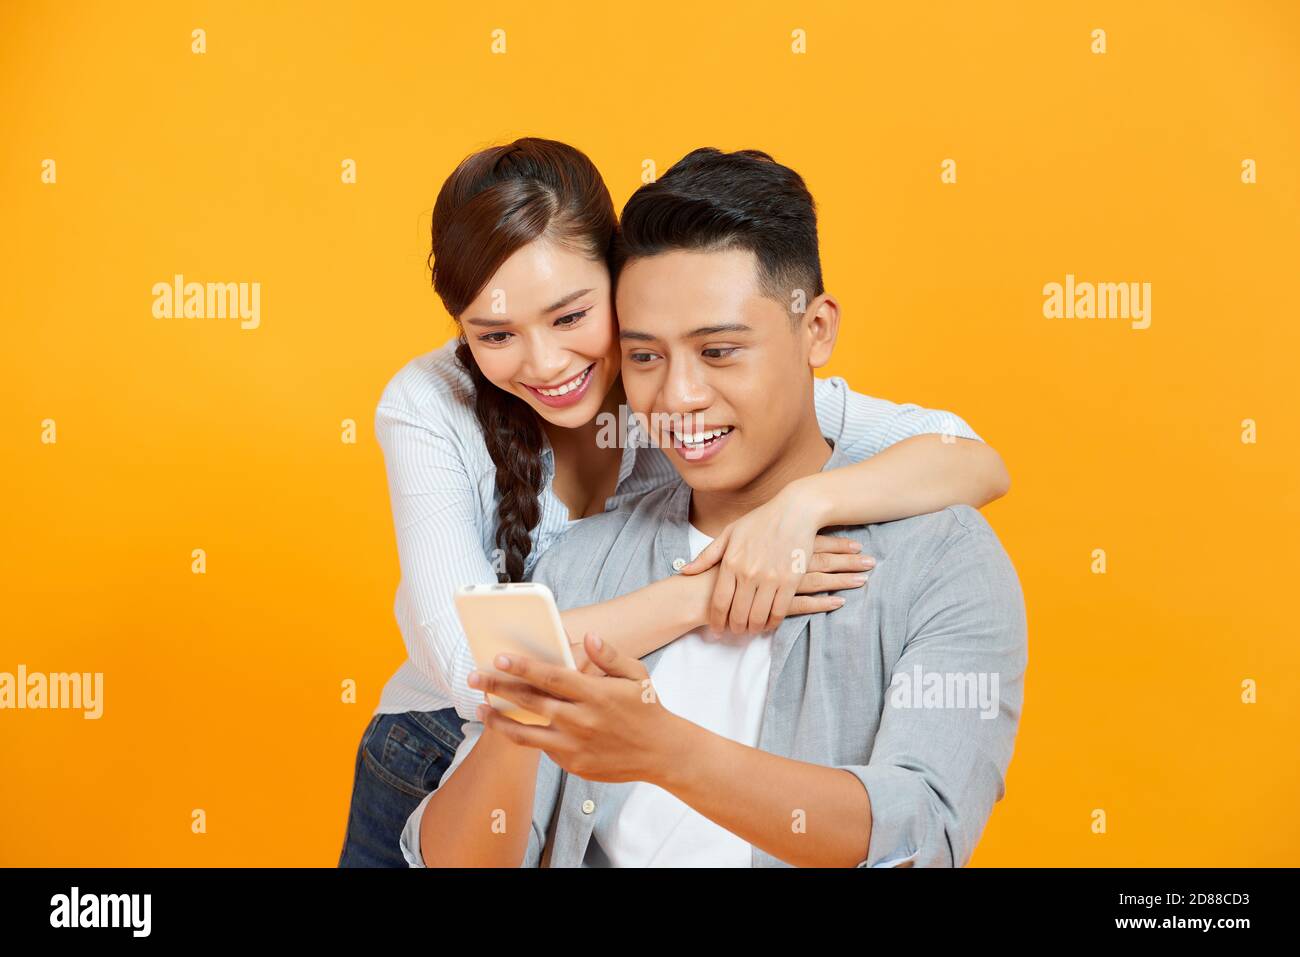 Couple or friends laughing funny and having fun with a smart phone Stock Photo